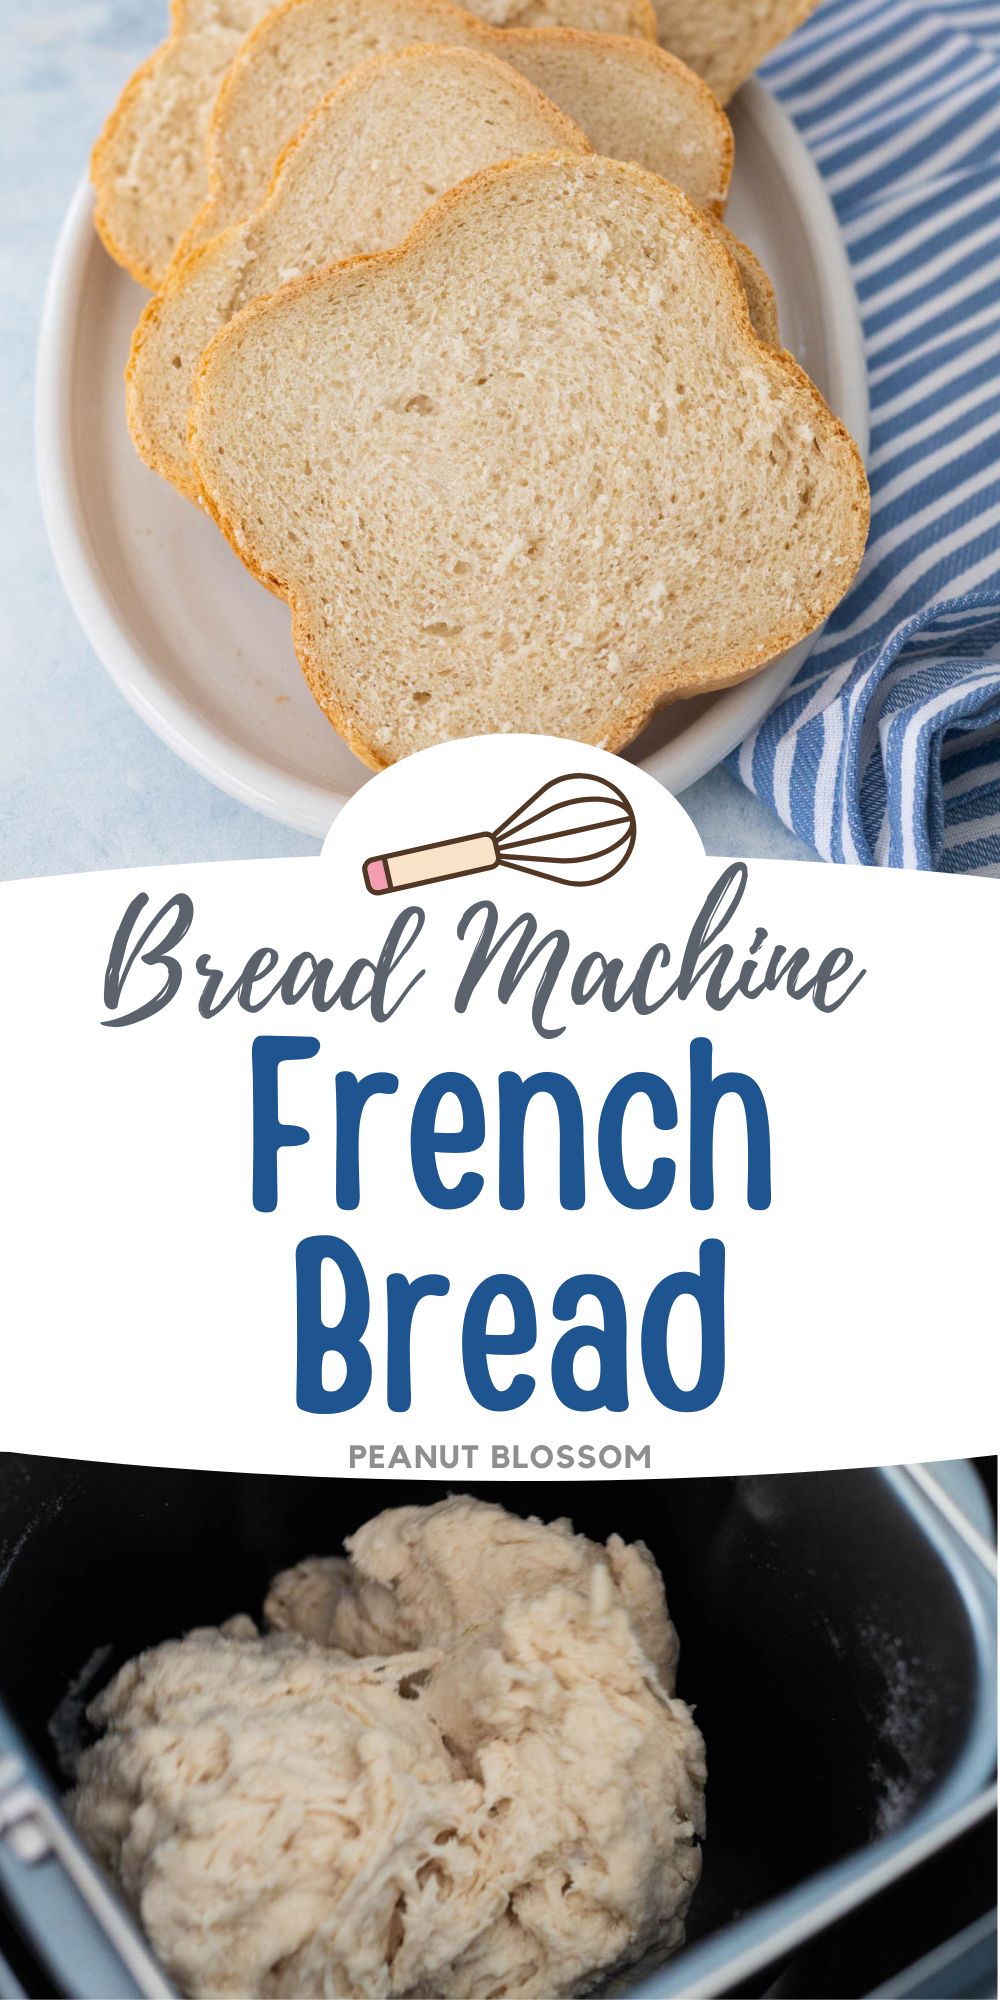 The photo collage shows the sliced French bread next to the dough being kneaded in the bread machine.